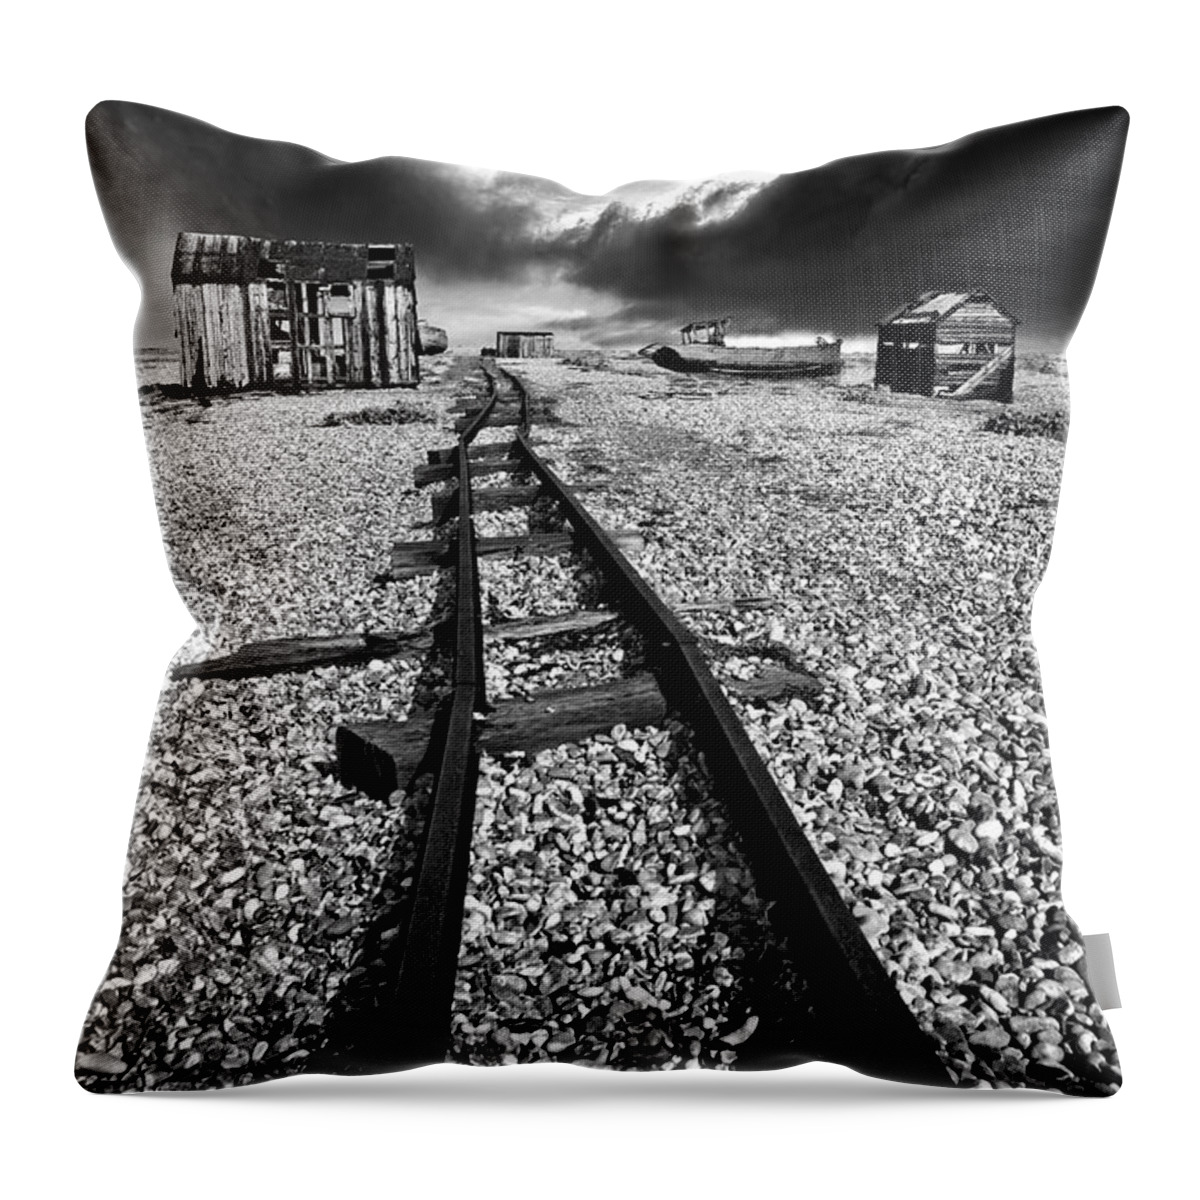 Black And White Throw Pillow featuring the photograph Fishing Boat Graveyard 6 by Meirion Matthias